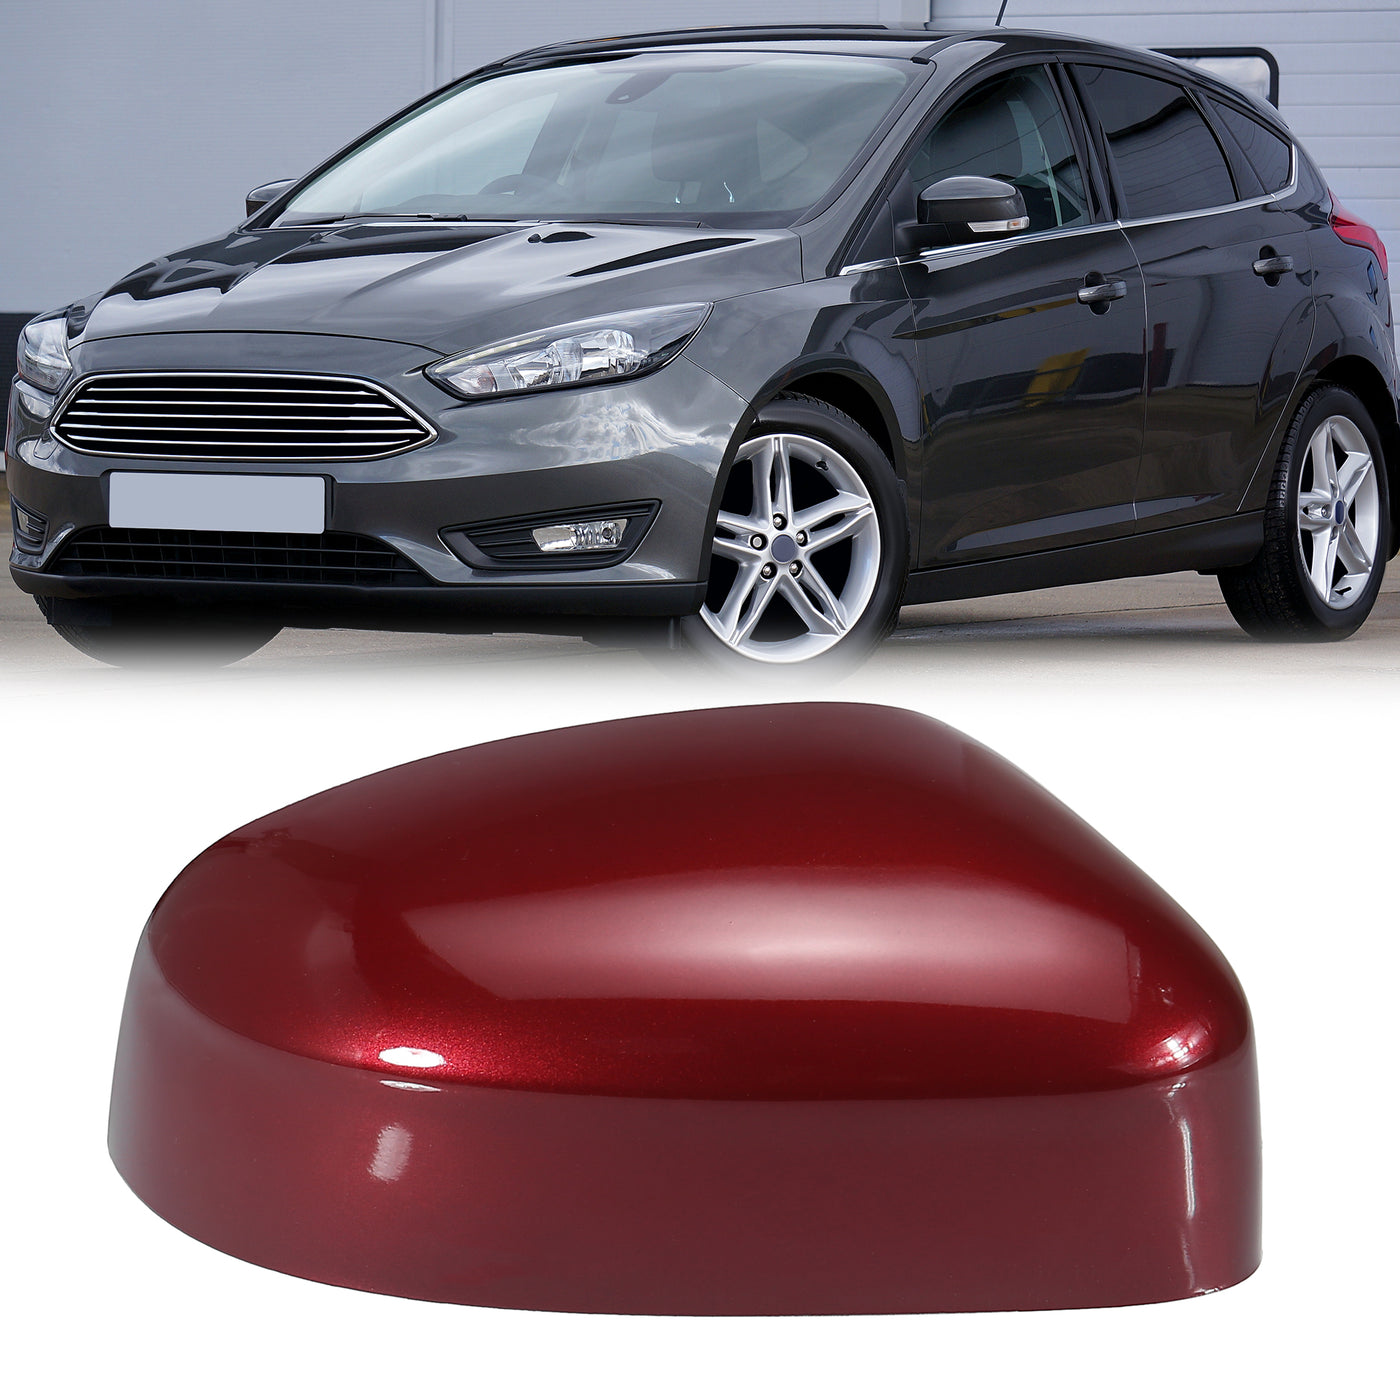 X AUTOHAUX Red Right Side Car Side Door Wing Mirror Cover Rear View Mirror Cap for Ford Focus MK2 Facelift 2008-2011 for Ford Focus MK3 2012-2017